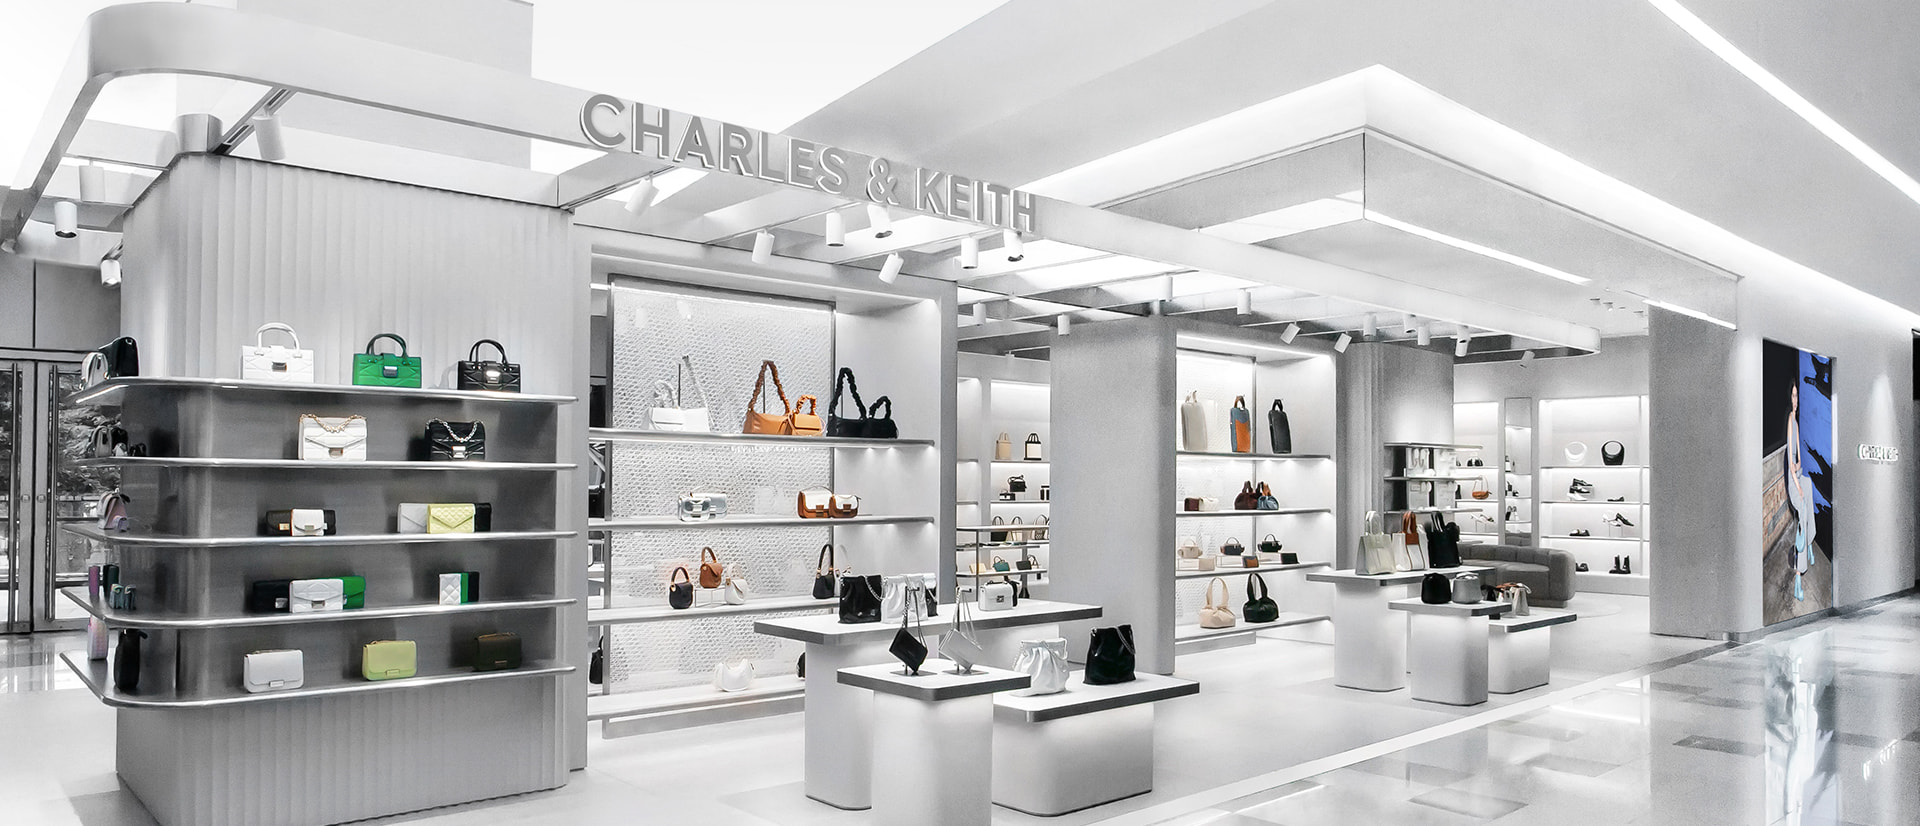 Exterior of the new CHARLES & KEITH space at Mega City, located in the Banqiao District of New Taipei, Taiwan